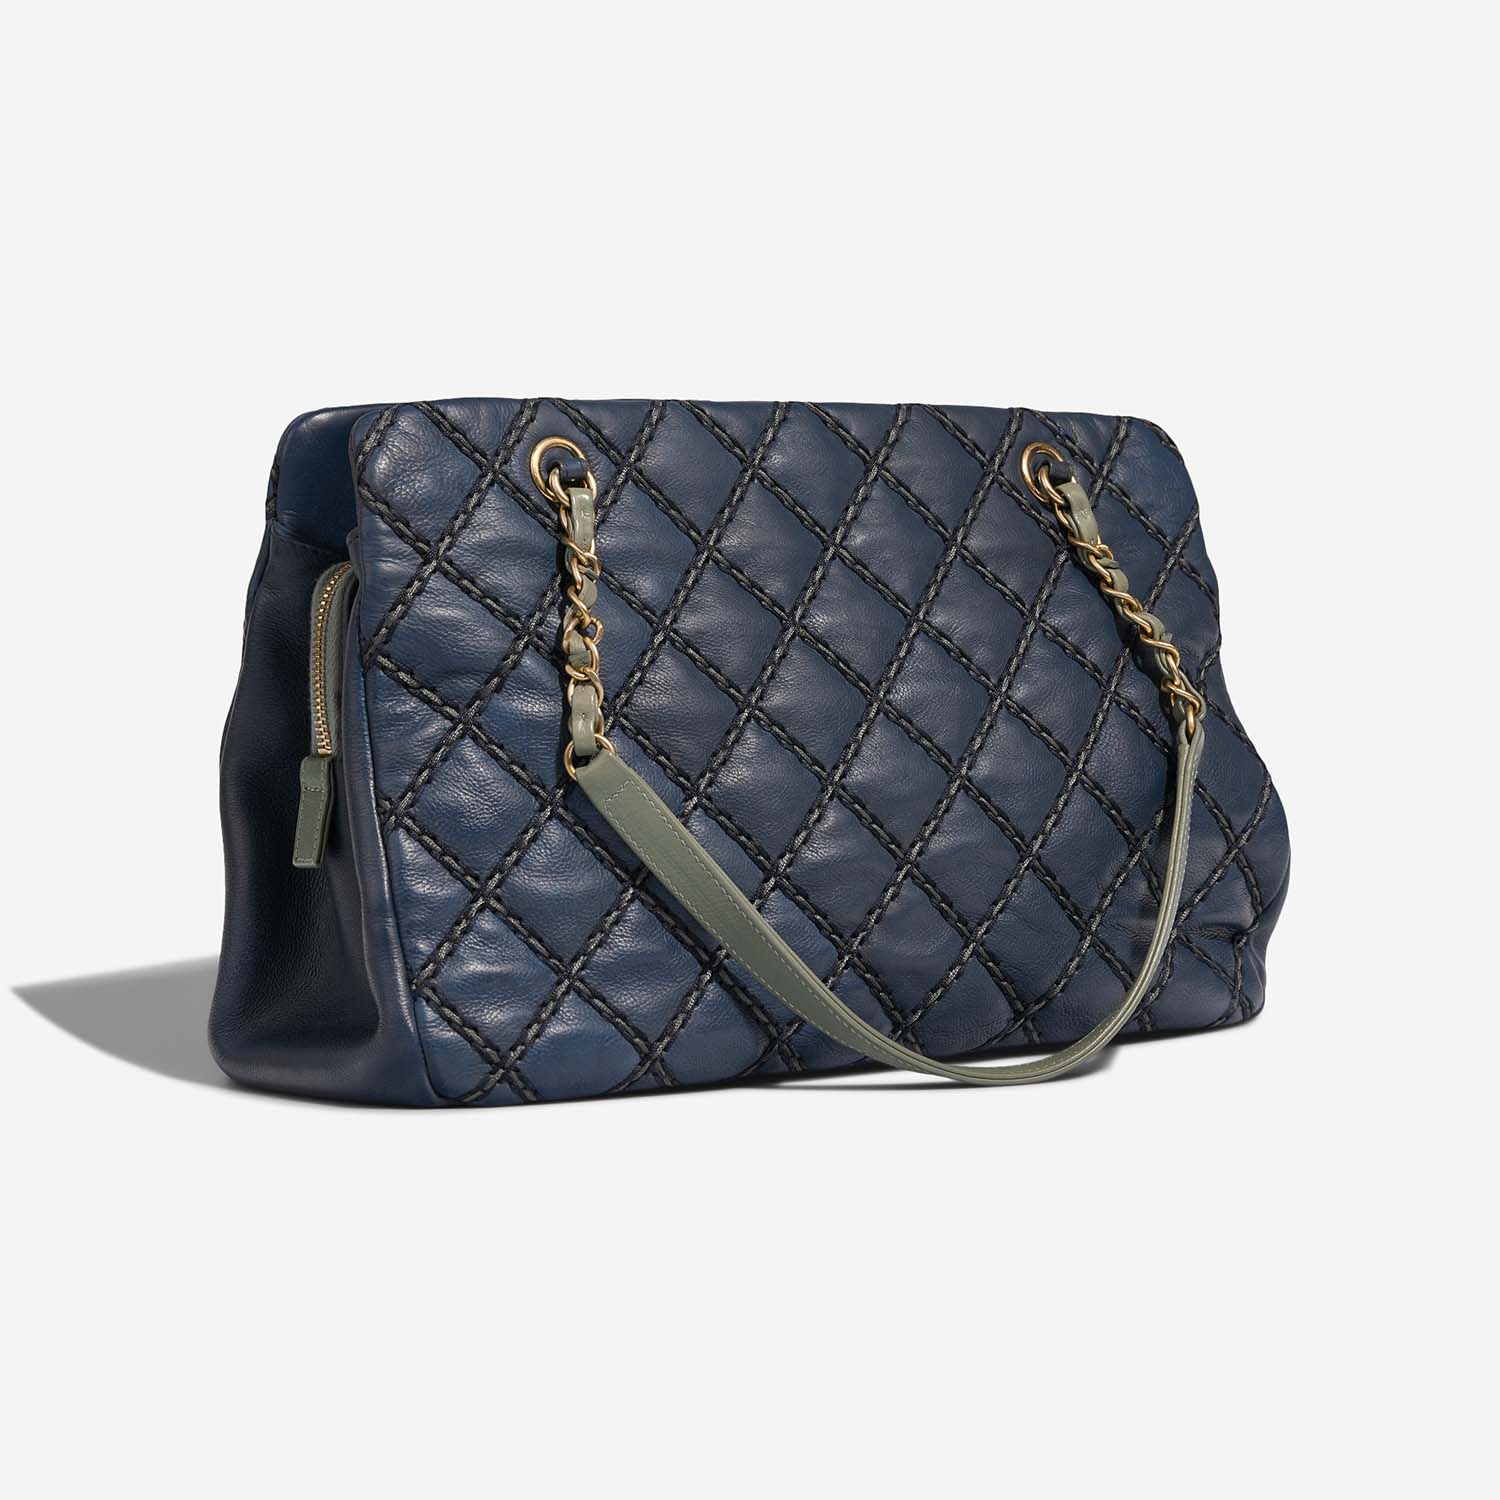 Chanel Shopping Tote Navy 7SB S | Sell your designer bag on Saclab.com